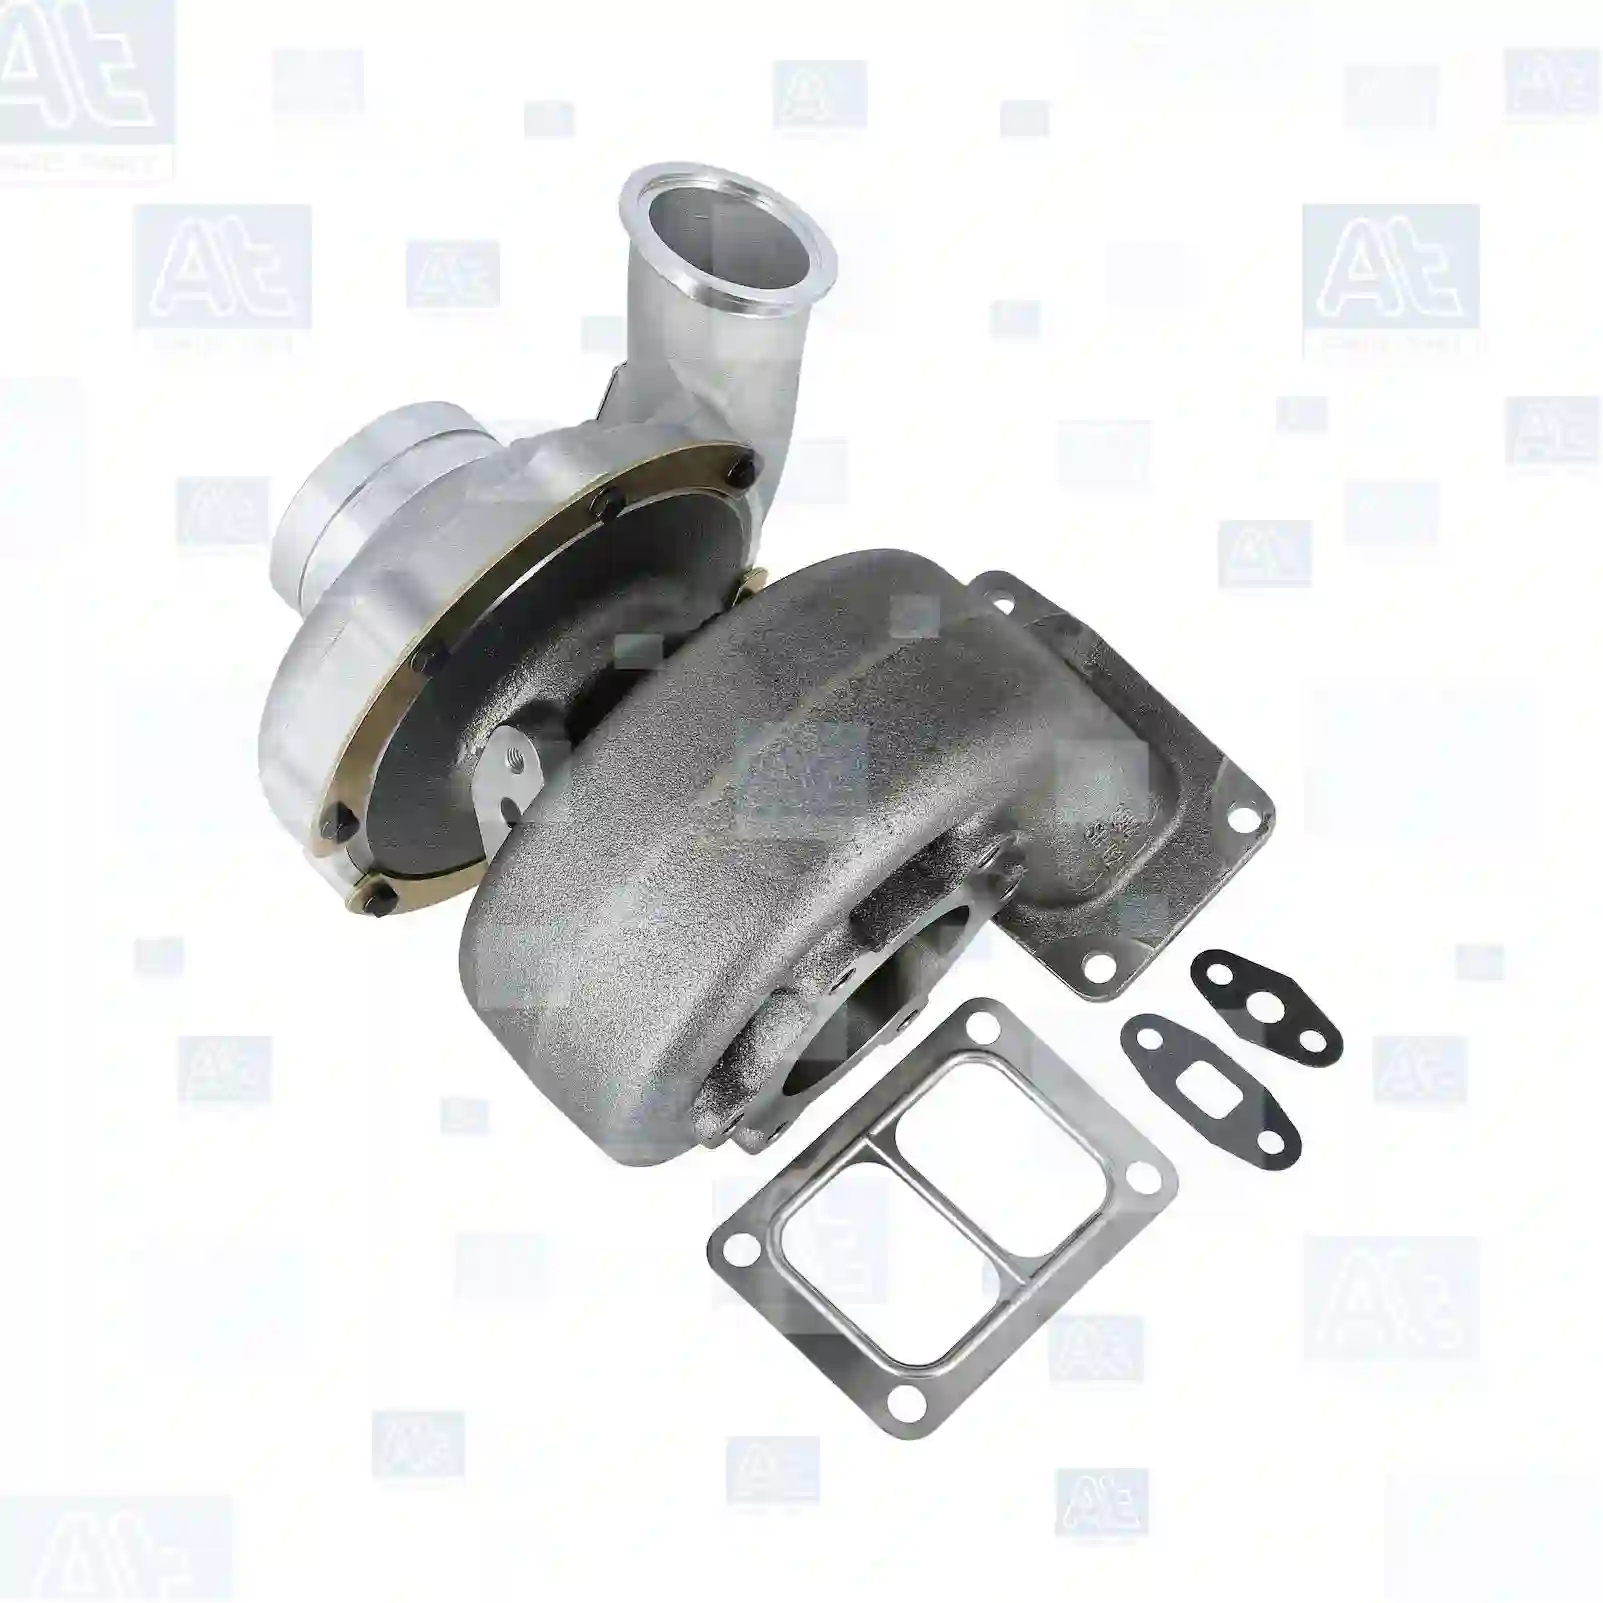 Turbocharger, with gasket kit, at no 77700950, oem no: 04818600, 04819761, 04819794, 04840879, 04847181, 04854264, 4840879, 500373230, 500373231, 500373233, 98414561, 98429361, 98462944, 98462946, 98462947, 98488950, 99461011, 11031711, 3526008, 382690, 3826906, 3826911, 468922, 470109, 470509, 470779, 470931, 470932, 470943, 470944, 478030, 478122, 478522, 478673, 478794, 478795, 478995, 5001912, 5002779, 5002885, 5003369, 5003370, 6888576, 8112299 At Spare Part | Engine, Accelerator Pedal, Camshaft, Connecting Rod, Crankcase, Crankshaft, Cylinder Head, Engine Suspension Mountings, Exhaust Manifold, Exhaust Gas Recirculation, Filter Kits, Flywheel Housing, General Overhaul Kits, Engine, Intake Manifold, Oil Cleaner, Oil Cooler, Oil Filter, Oil Pump, Oil Sump, Piston & Liner, Sensor & Switch, Timing Case, Turbocharger, Cooling System, Belt Tensioner, Coolant Filter, Coolant Pipe, Corrosion Prevention Agent, Drive, Expansion Tank, Fan, Intercooler, Monitors & Gauges, Radiator, Thermostat, V-Belt / Timing belt, Water Pump, Fuel System, Electronical Injector Unit, Feed Pump, Fuel Filter, cpl., Fuel Gauge Sender,  Fuel Line, Fuel Pump, Fuel Tank, Injection Line Kit, Injection Pump, Exhaust System, Clutch & Pedal, Gearbox, Propeller Shaft, Axles, Brake System, Hubs & Wheels, Suspension, Leaf Spring, Universal Parts / Accessories, Steering, Electrical System, Cabin Turbocharger, with gasket kit, at no 77700950, oem no: 04818600, 04819761, 04819794, 04840879, 04847181, 04854264, 4840879, 500373230, 500373231, 500373233, 98414561, 98429361, 98462944, 98462946, 98462947, 98488950, 99461011, 11031711, 3526008, 382690, 3826906, 3826911, 468922, 470109, 470509, 470779, 470931, 470932, 470943, 470944, 478030, 478122, 478522, 478673, 478794, 478795, 478995, 5001912, 5002779, 5002885, 5003369, 5003370, 6888576, 8112299 At Spare Part | Engine, Accelerator Pedal, Camshaft, Connecting Rod, Crankcase, Crankshaft, Cylinder Head, Engine Suspension Mountings, Exhaust Manifold, Exhaust Gas Recirculation, Filter Kits, Flywheel Housing, General Overhaul Kits, Engine, Intake Manifold, Oil Cleaner, Oil Cooler, Oil Filter, Oil Pump, Oil Sump, Piston & Liner, Sensor & Switch, Timing Case, Turbocharger, Cooling System, Belt Tensioner, Coolant Filter, Coolant Pipe, Corrosion Prevention Agent, Drive, Expansion Tank, Fan, Intercooler, Monitors & Gauges, Radiator, Thermostat, V-Belt / Timing belt, Water Pump, Fuel System, Electronical Injector Unit, Feed Pump, Fuel Filter, cpl., Fuel Gauge Sender,  Fuel Line, Fuel Pump, Fuel Tank, Injection Line Kit, Injection Pump, Exhaust System, Clutch & Pedal, Gearbox, Propeller Shaft, Axles, Brake System, Hubs & Wheels, Suspension, Leaf Spring, Universal Parts / Accessories, Steering, Electrical System, Cabin